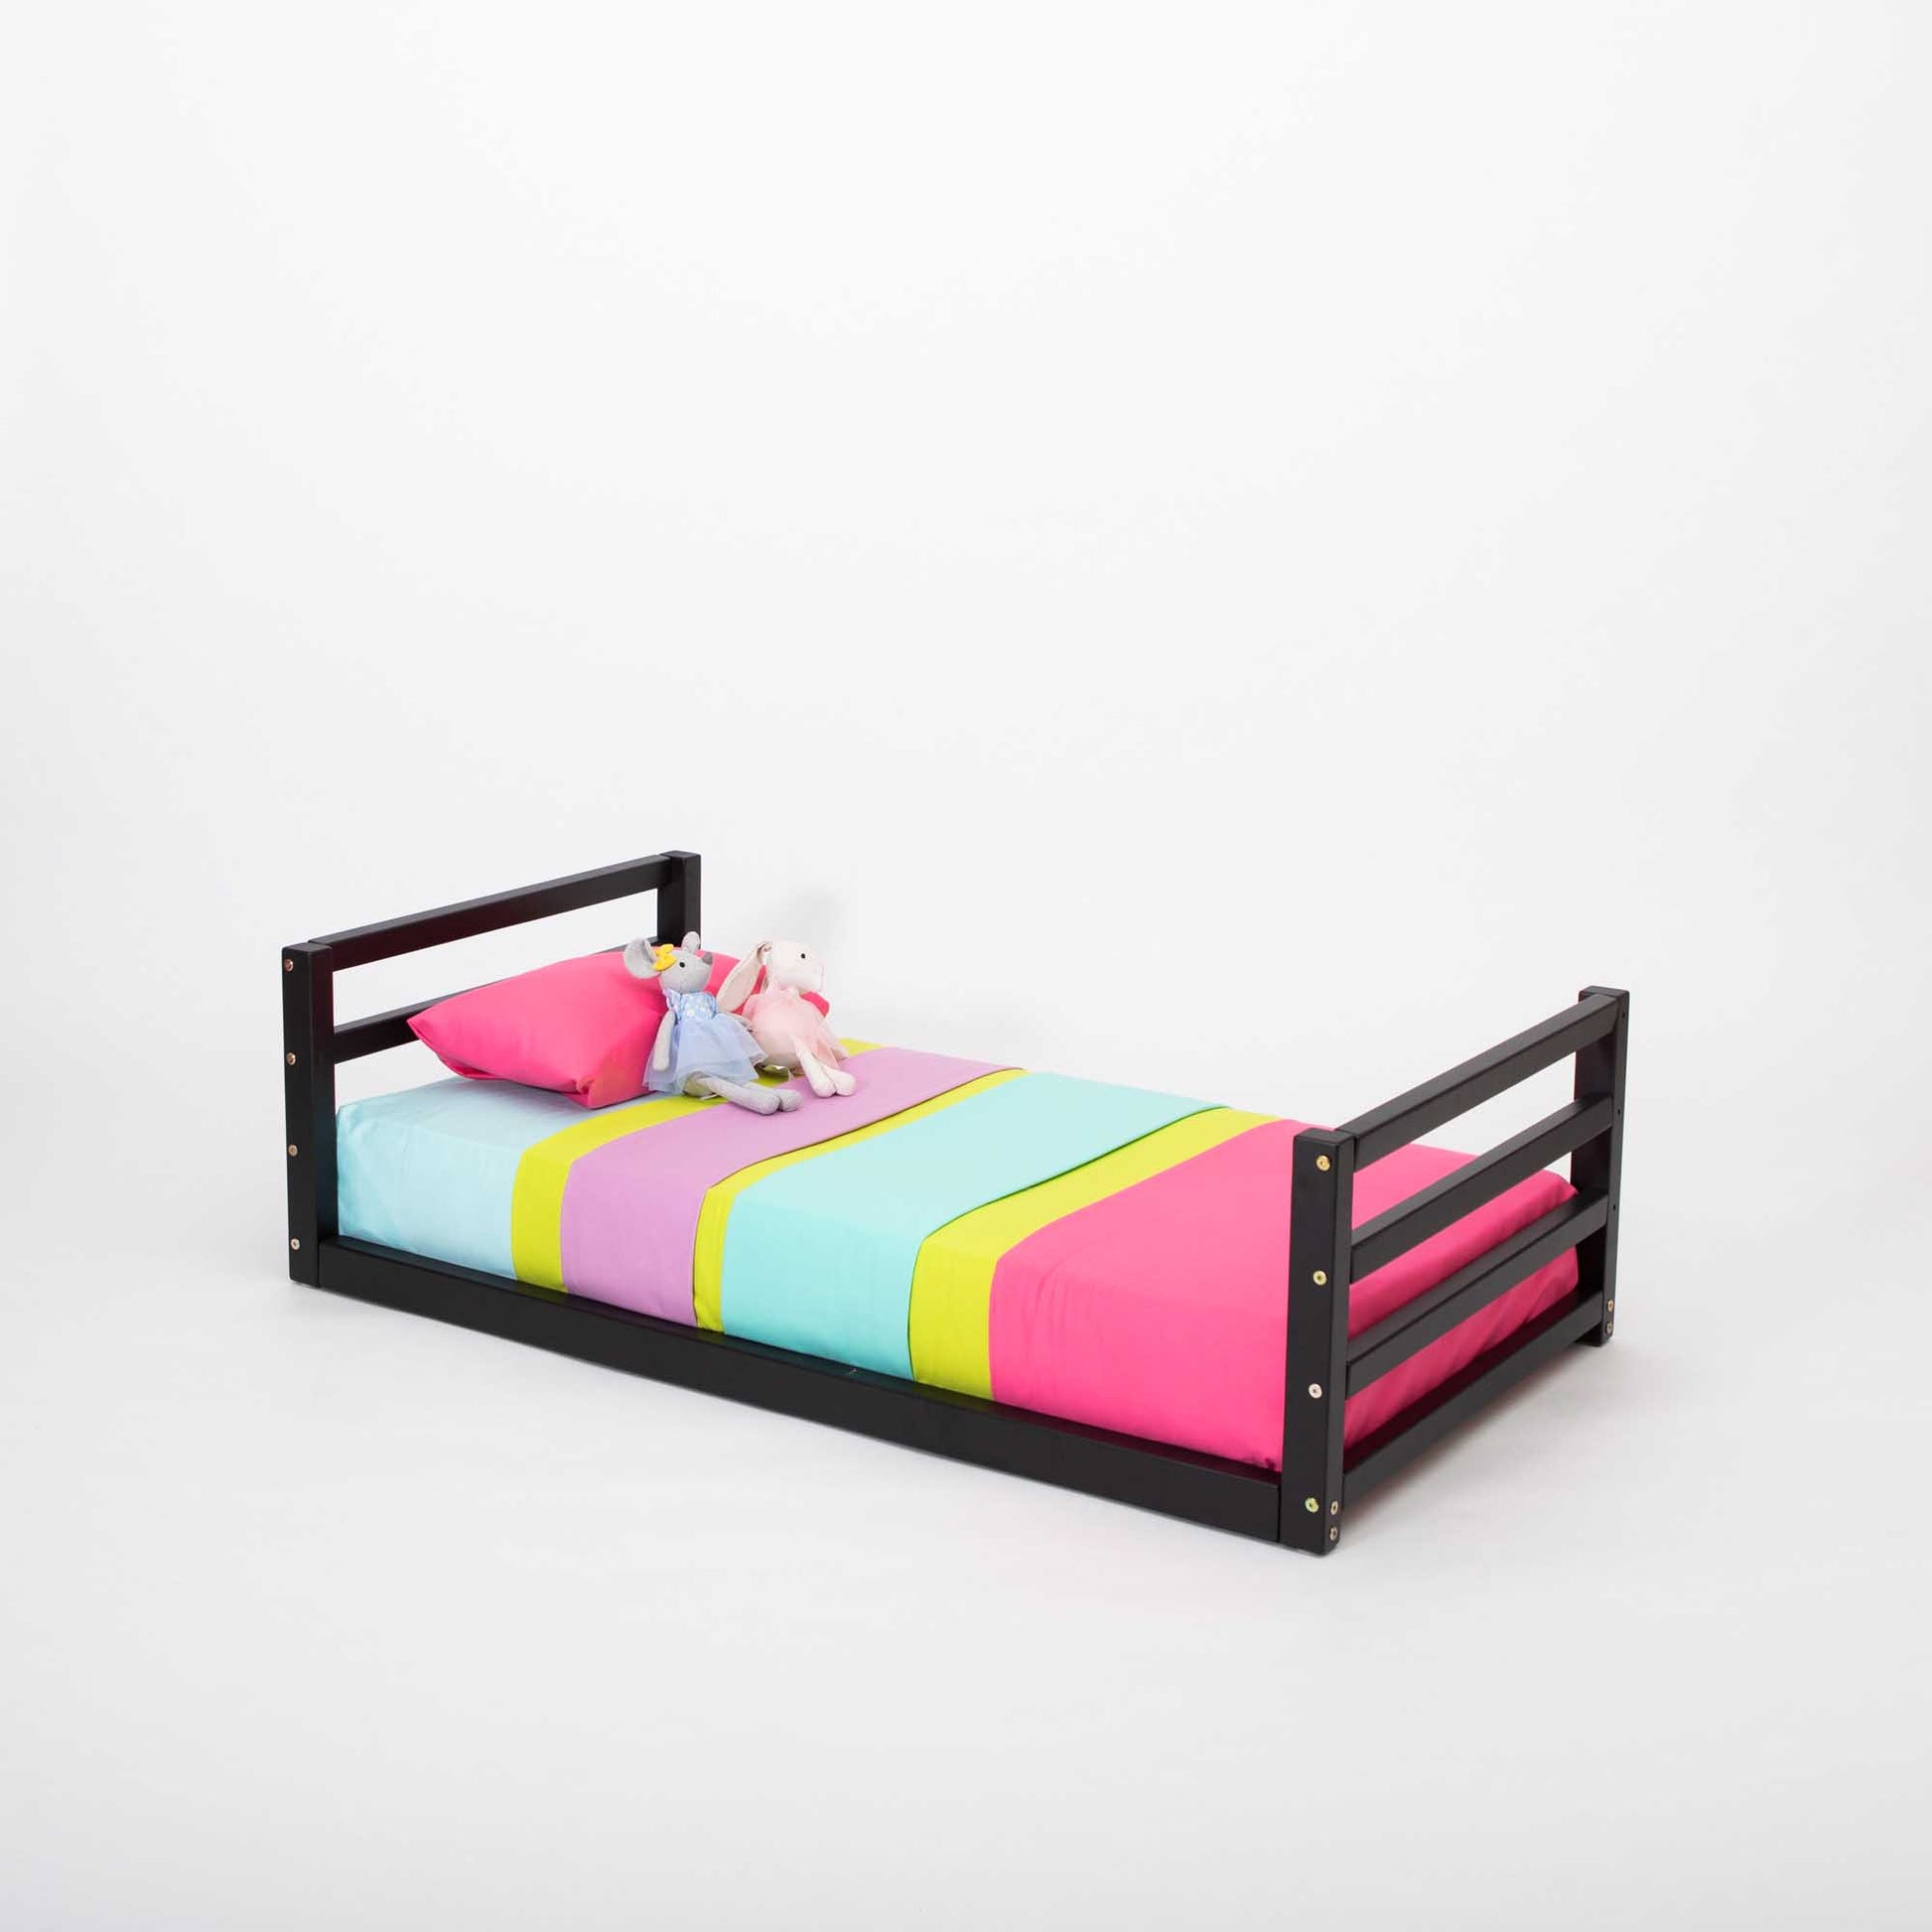 A colorful striped Sweet Home From Wood toddler floor bed with a horizontal rail headboard and footboard.